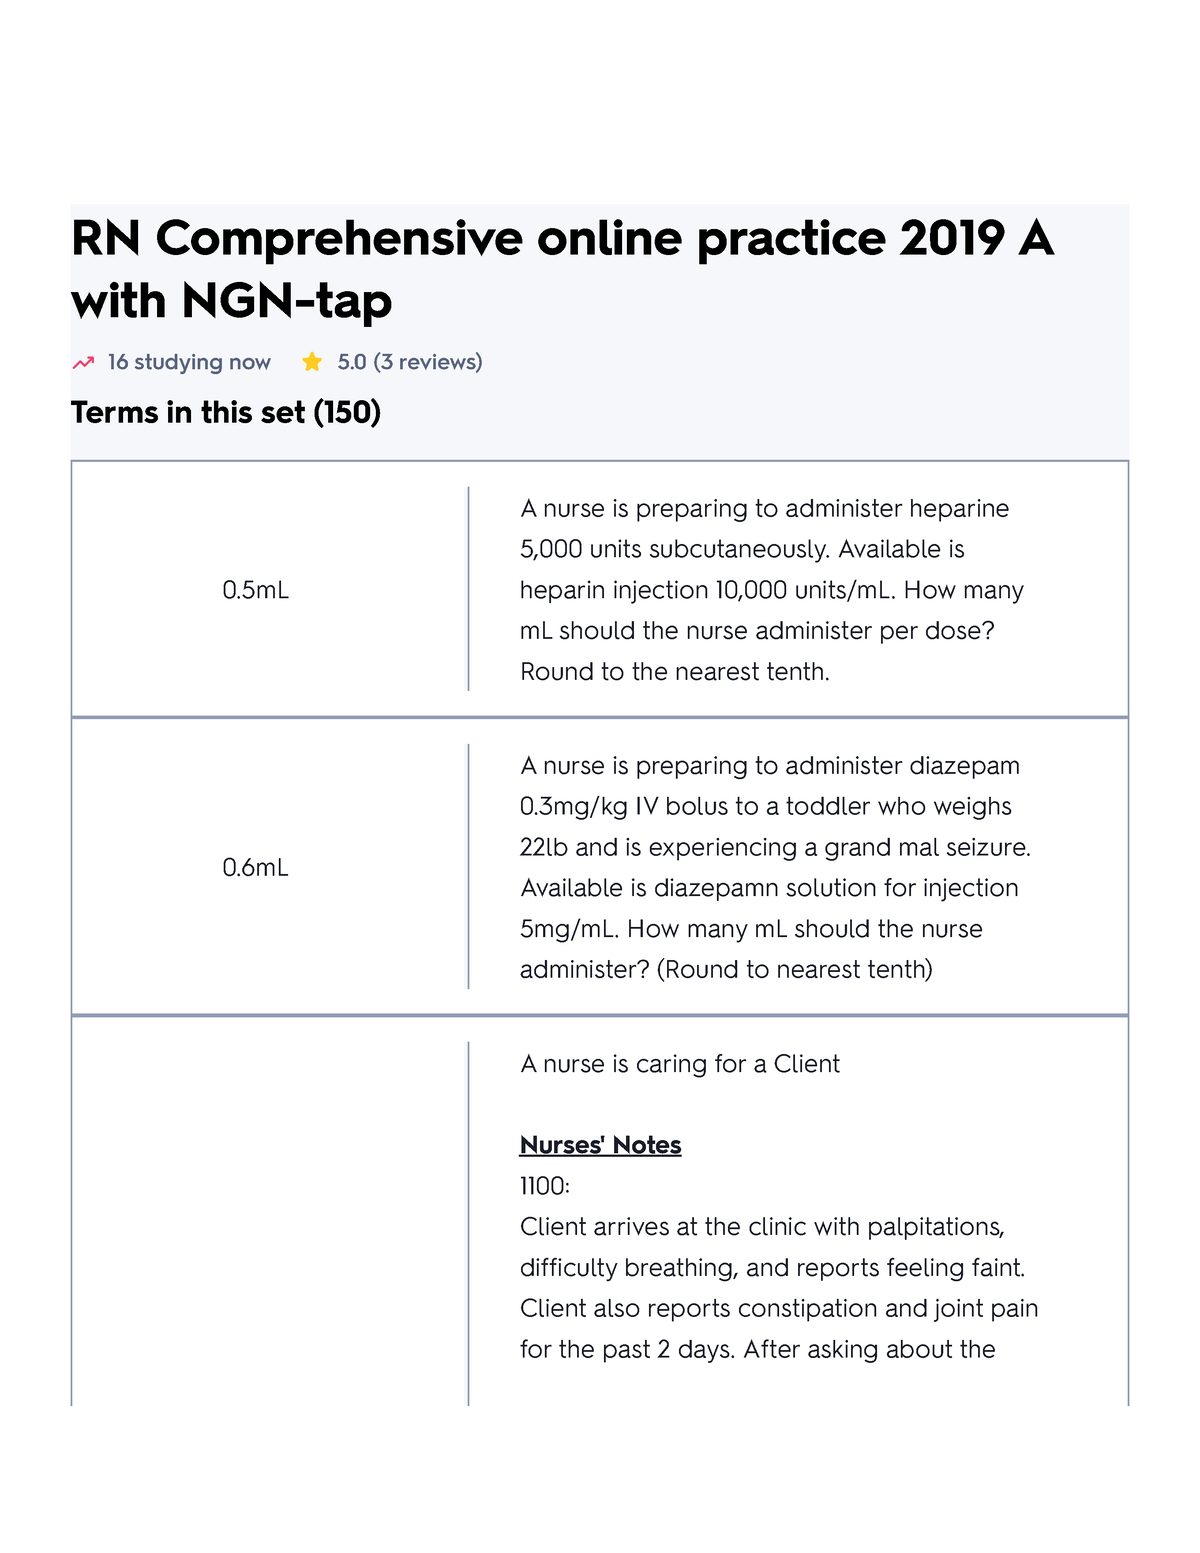 RN Comprehensive online practice 2019 A with NGNtap Flashcards Quizlet